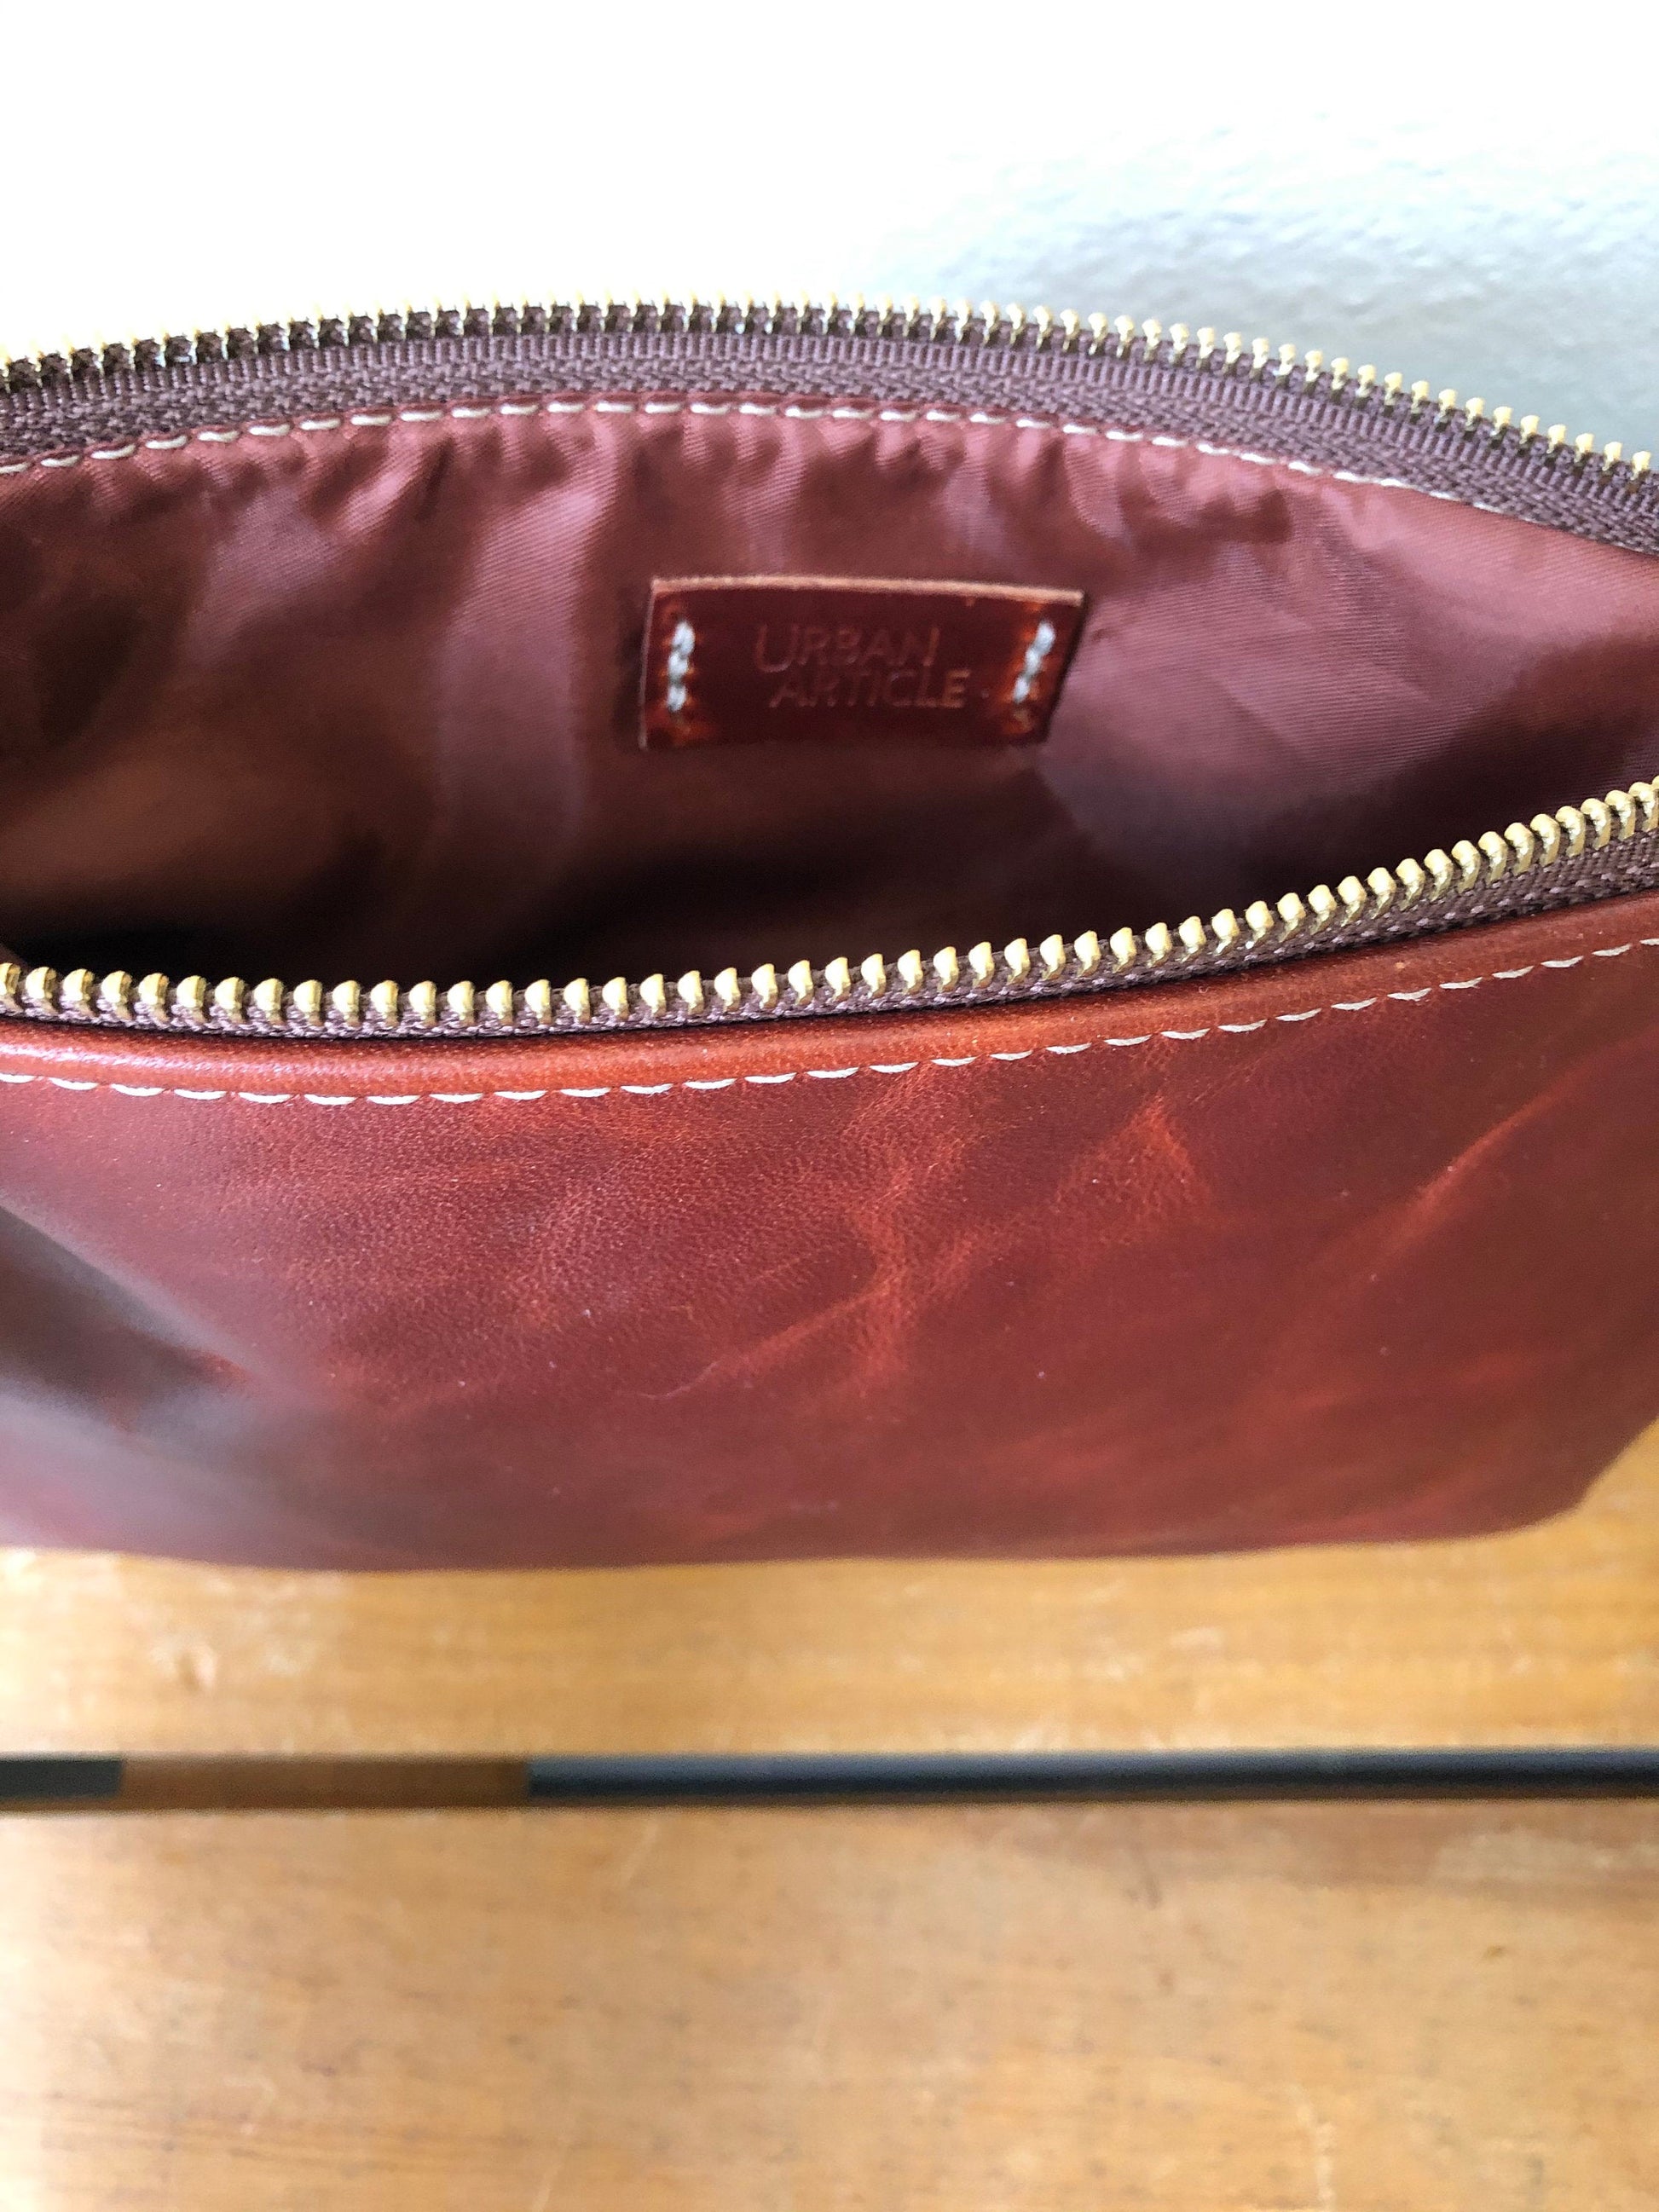 Inside of red brown leather clutch, silky lining and tag also in red brown